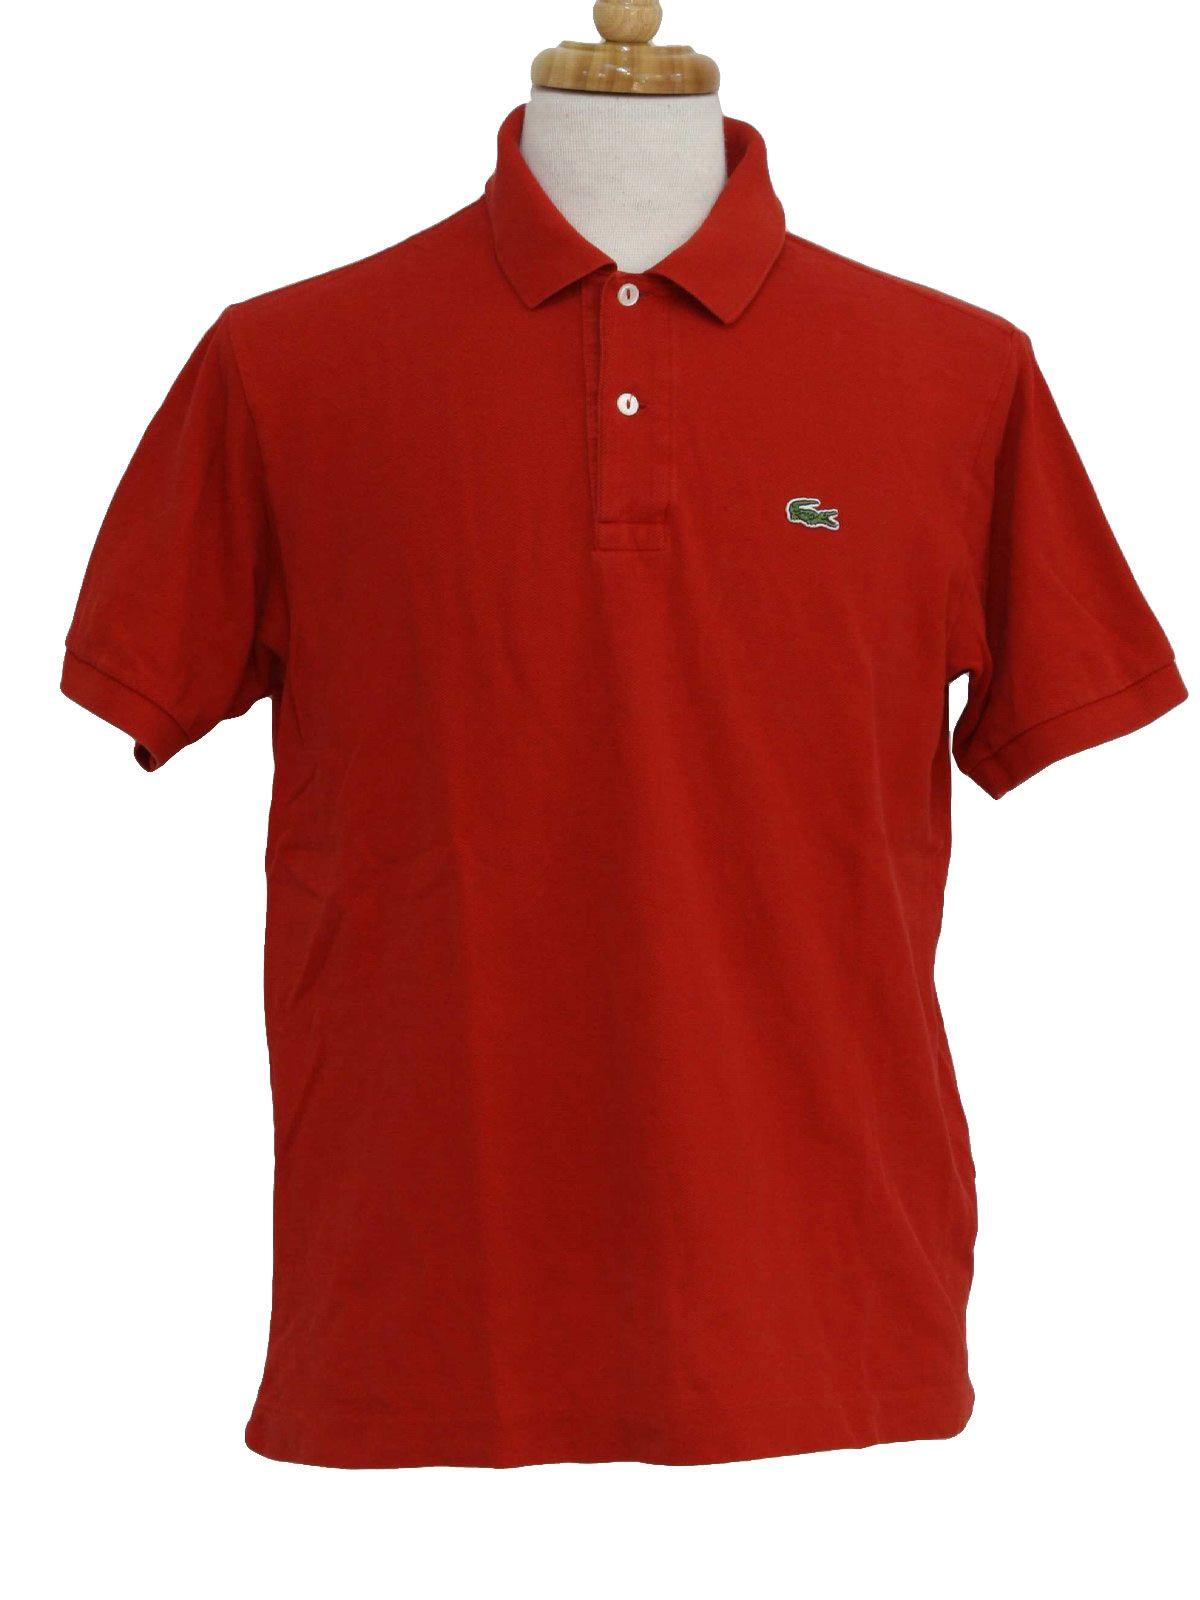 Alligator Clothing Logo - 80's Vintage Shirt: 80s -Lacoste- Mens red woven cotton short sleeve